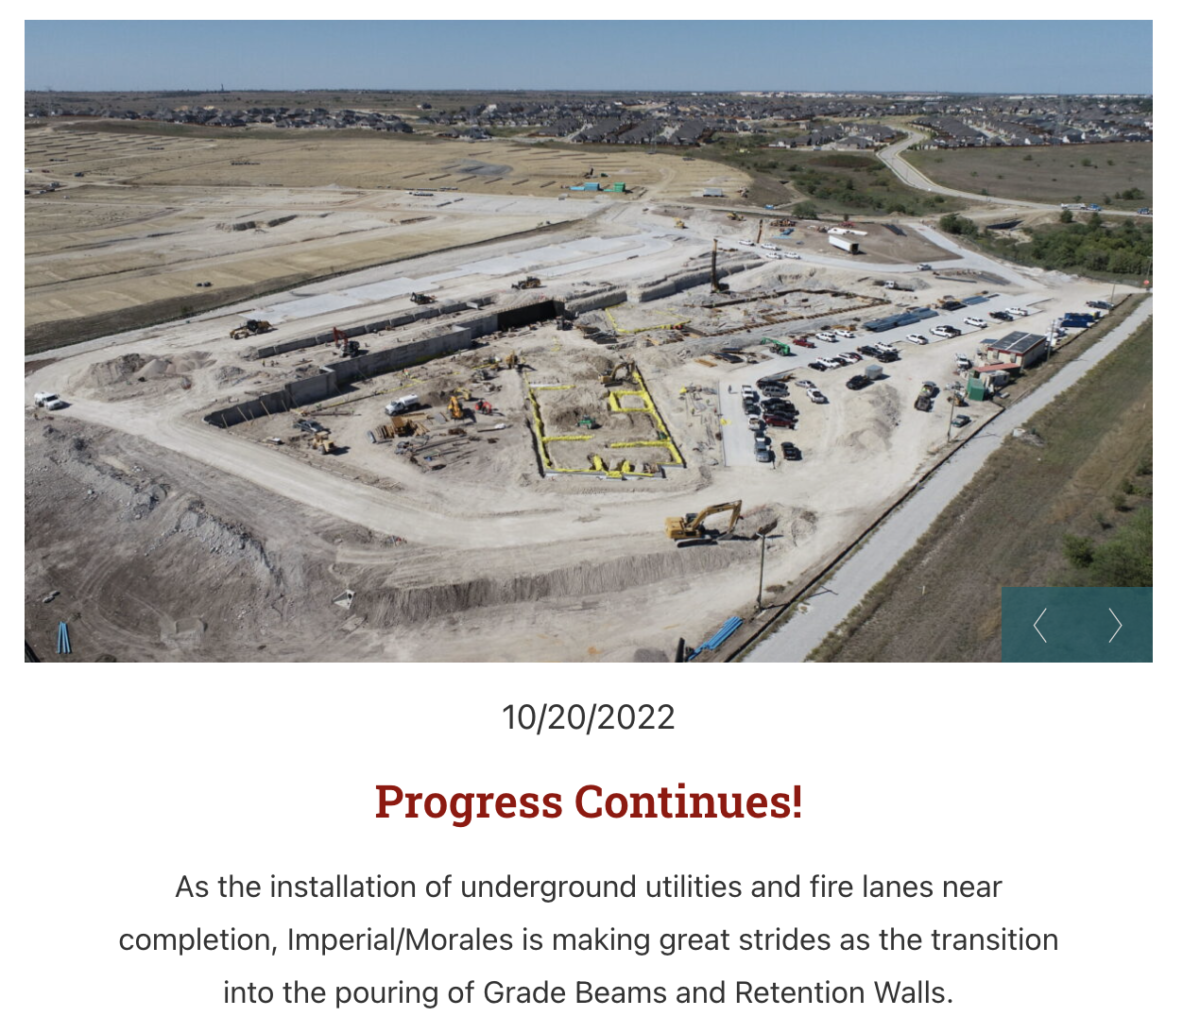 A photo of a construction site with the words: 
0/20/2022
Progress Continues!
As the installation of underground utilities and fire lanes near completion, Imperial/Morales is making great strides as the transition into the pouring of Grade Beams and Retention Walls.